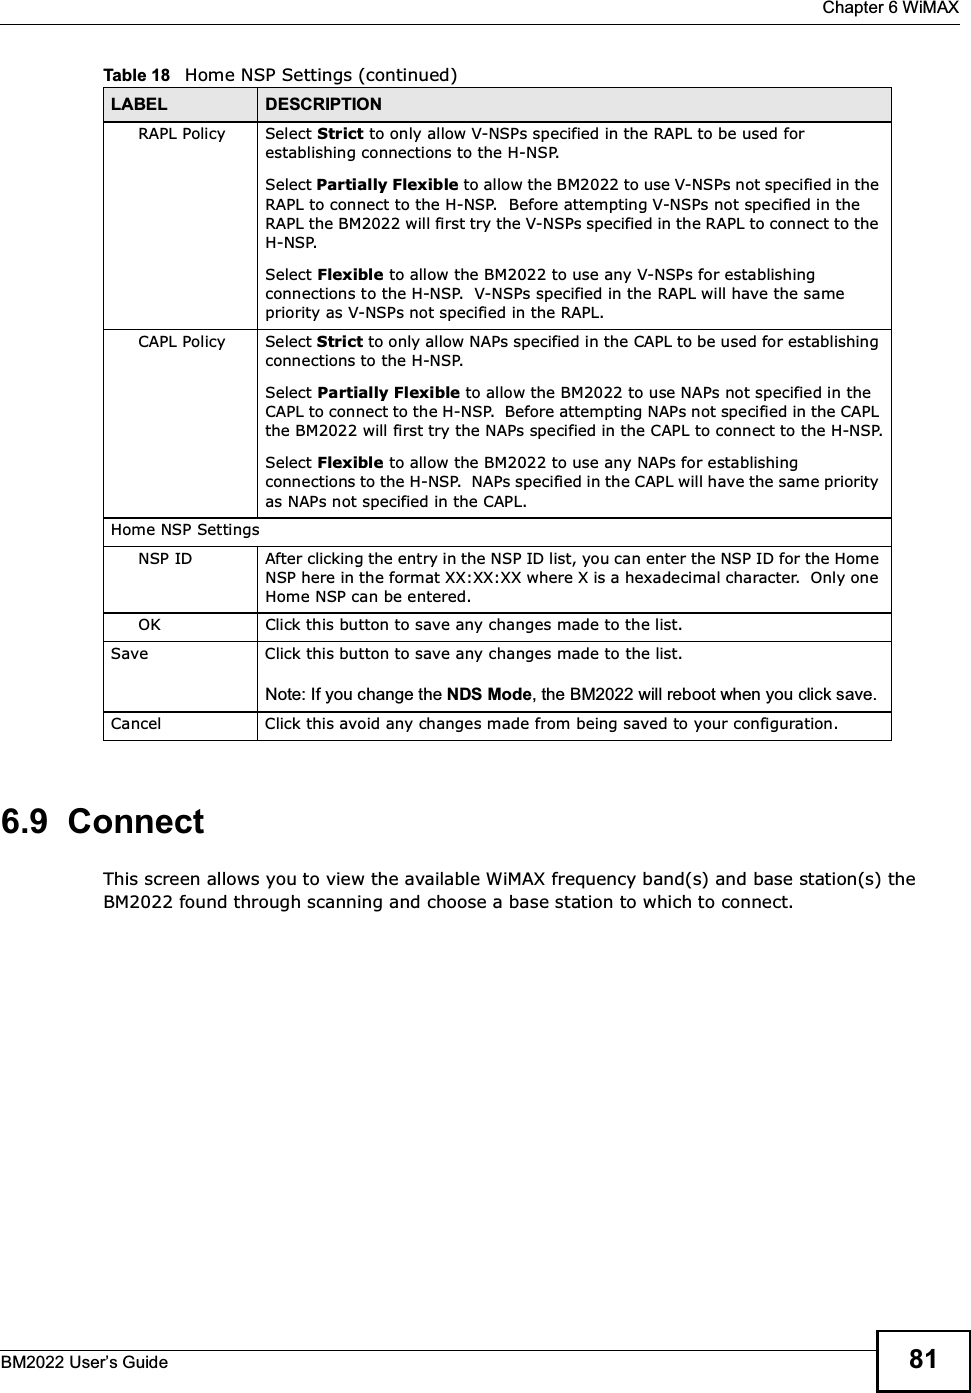  Chapter 6 WiMAXBM2022 Users Guide 816.9  ConnectThis screen allows you to view the available WiMAX frequency band(s) and base station(s) the BM2022 found through scanning and choose a base station to which to connect.RAPL Policy Select Strict to only allow V-NSPs specified in the RAPL to be used for establishing connections to the H-NSP.Select Partially Flexible to allow the BM2022 to use V-NSPs not specified in the RAPL to connect to the H-NSP.  Before attempting V-NSPs not specified in the RAPL the BM2022 will first try the V-NSPs specified in the RAPL to connect to the H-NSP.Select Flexible to allow the BM2022 to use any V-NSPs for establishing connections to the H-NSP.  V-NSPs specified in the RAPL will have the same priority as V-NSPs not specified in the RAPL.CAPL Policy Select Strict to only allow NAPs specified in the CAPL to be used for establishing connections to the H-NSP.Select Partially Flexible to allow the BM2022 to use NAPs not specified in the CAPL to connect to the H-NSP.  Before attempting NAPs not specified in the CAPL the BM2022 will first try the NAPs specified in the CAPL to connect to the H-NSP.Select Flexible to allow the BM2022 to use any NAPs for establishing connections to the H-NSP.  NAPs specified in the CAPL will have the same priority as NAPs not specified in the CAPL.Home NSP SettingsNSP ID After clicking the entry in the NSP ID list, you can enter the NSP ID for the Home NSP here in the format XX:XX:XX where X is a hexadecimal character.  Only one Home NSP can be entered.OK Click this button to save any changes made to the list.Save Click this button to save any changes made to the list.  Note: If you change the NDS Mode, the BM2022 will reboot when you click save.Cancel Click this avoid any changes made from being saved to your configuration.Table 18   Home NSP Settings (continued)LABEL DESCRIPTION